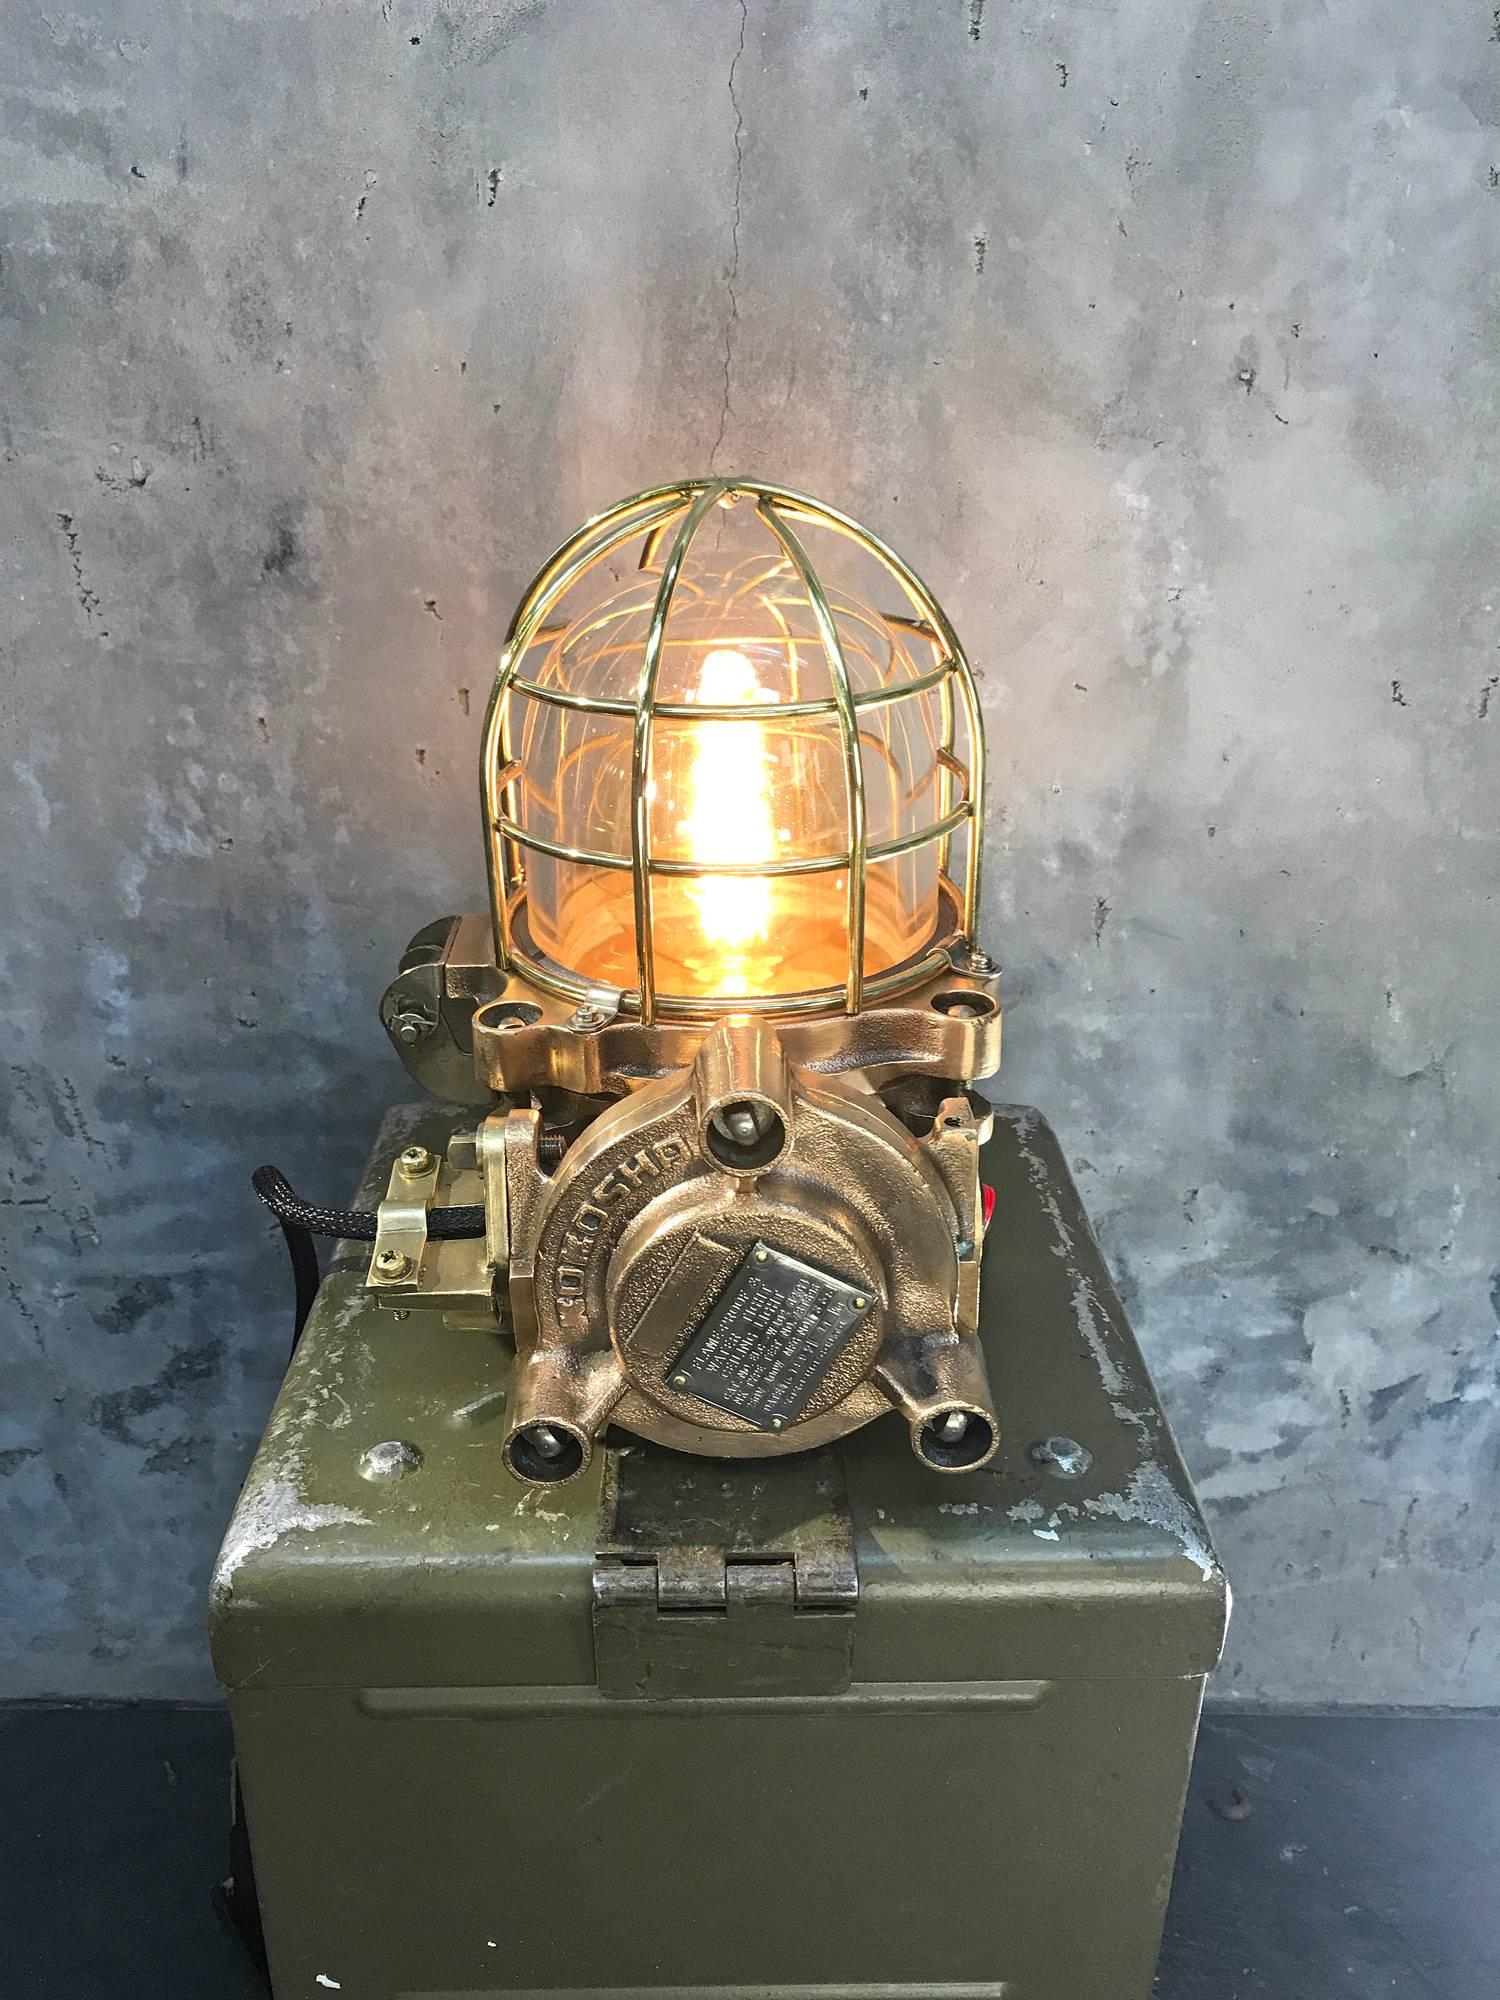 Flameproof cast bronze desk lamp with braided cable and dimmer switch.

Retro-fitted with a red glow switch, UK plug and vintage Edison filament Lamp E27.

Made in the 1980s by Kokosha - Osaka, Japan.

These lights are reclaimed from hazardous